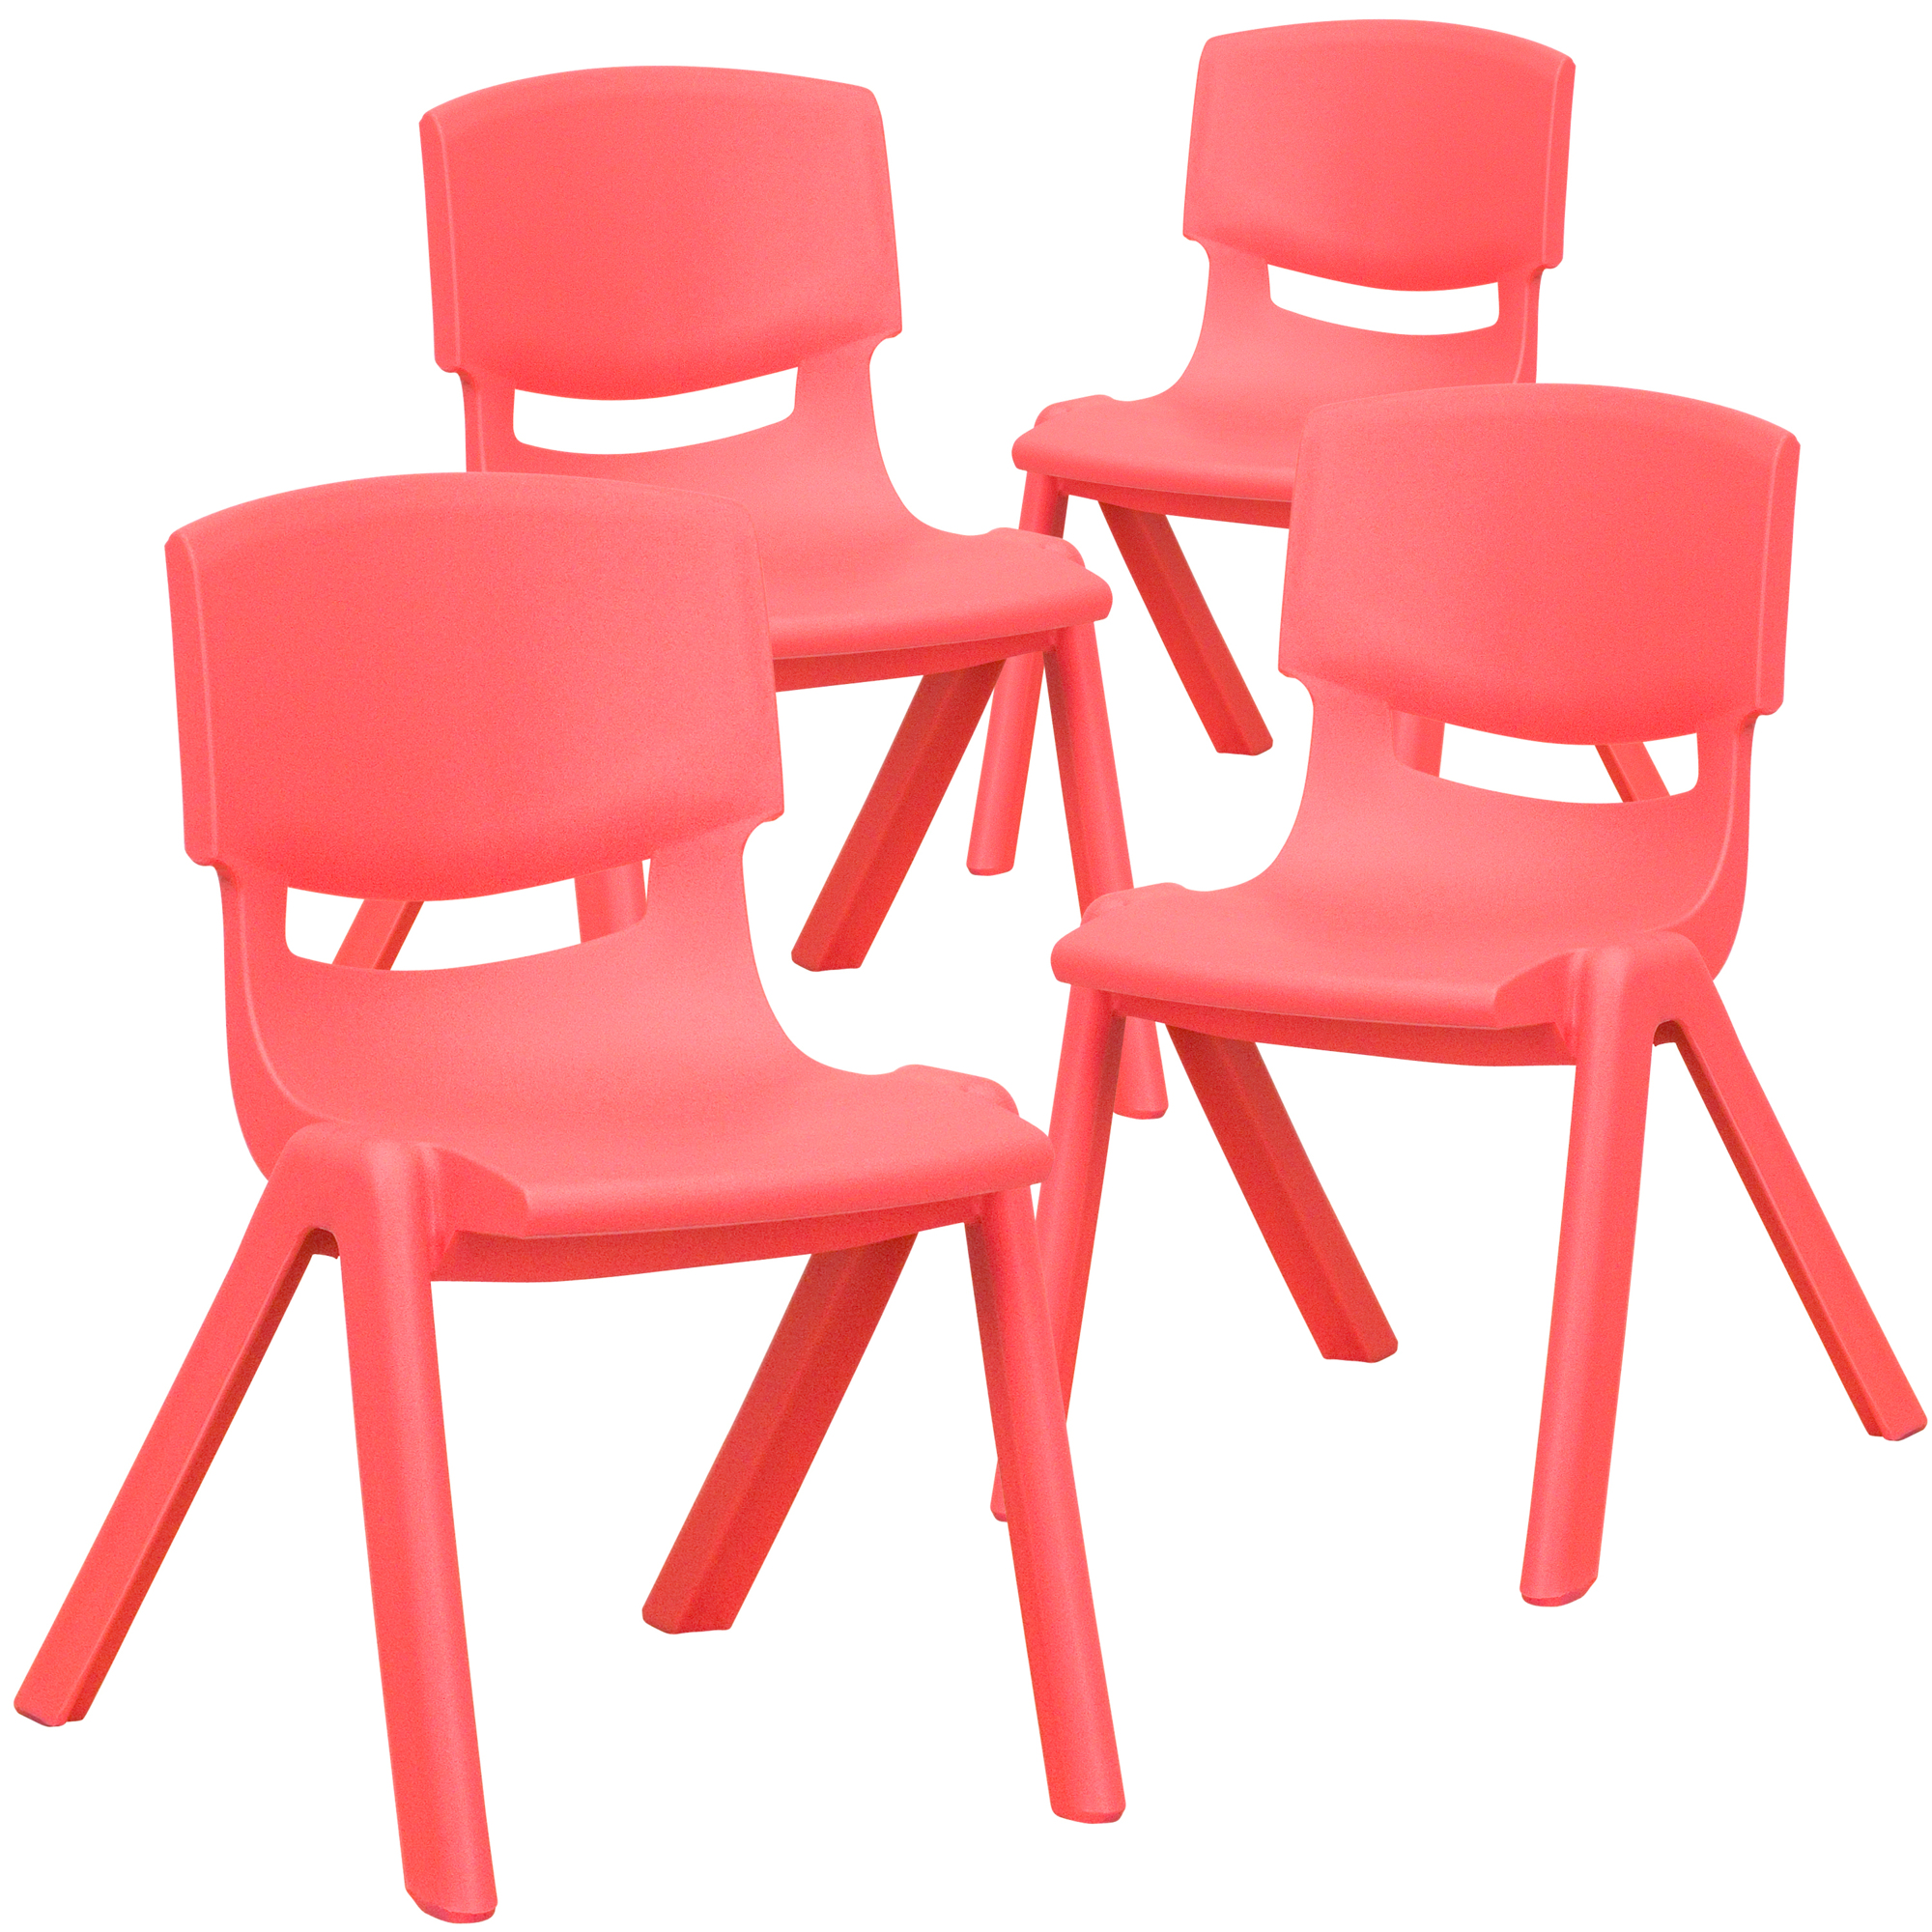 Flash Furniture, 4 Pack Red Plastic School Chair-12Inch H Seat, Primary Color Red, Included (qty.) 4, Model 4YUYCX4001RED